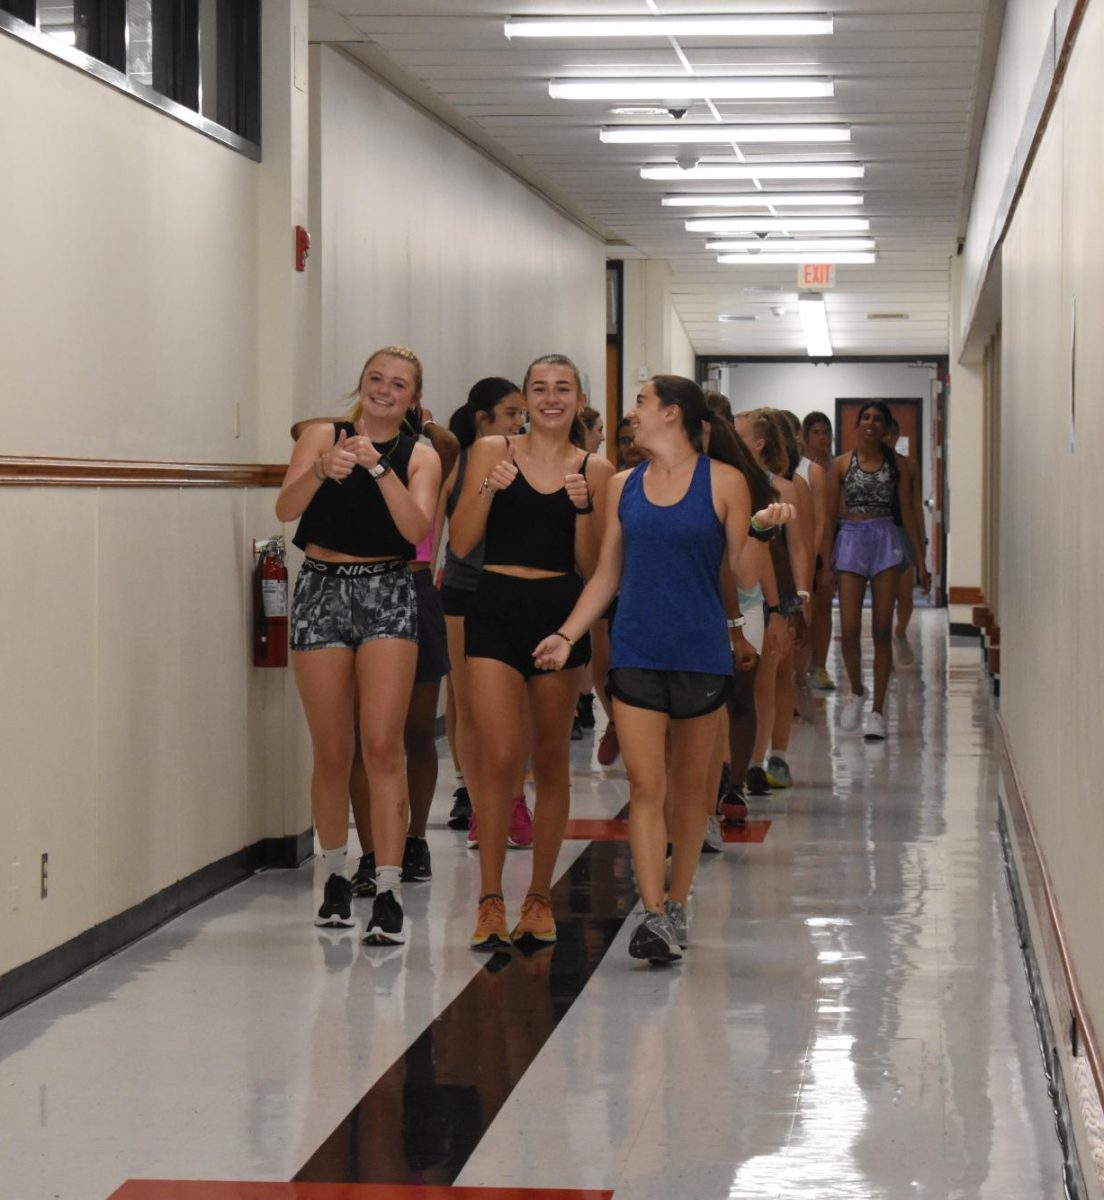 Girls+Cross+Country+team+combats+against+harsh+weather+to+continue+training.+%0AAthletes+for+cross+country%2C+football%2C+softball%2C+soccer+and+field+hockey+train+inside+by+running+through+the+hallways+and+using+the+gyms+and+weight+rooms.+From+left+to+right+is+Amelia+Stumpe+%2812%29%2C+Sophia+Burk+%2811%29%2C+Natalie+Duvall+%2810%29.+